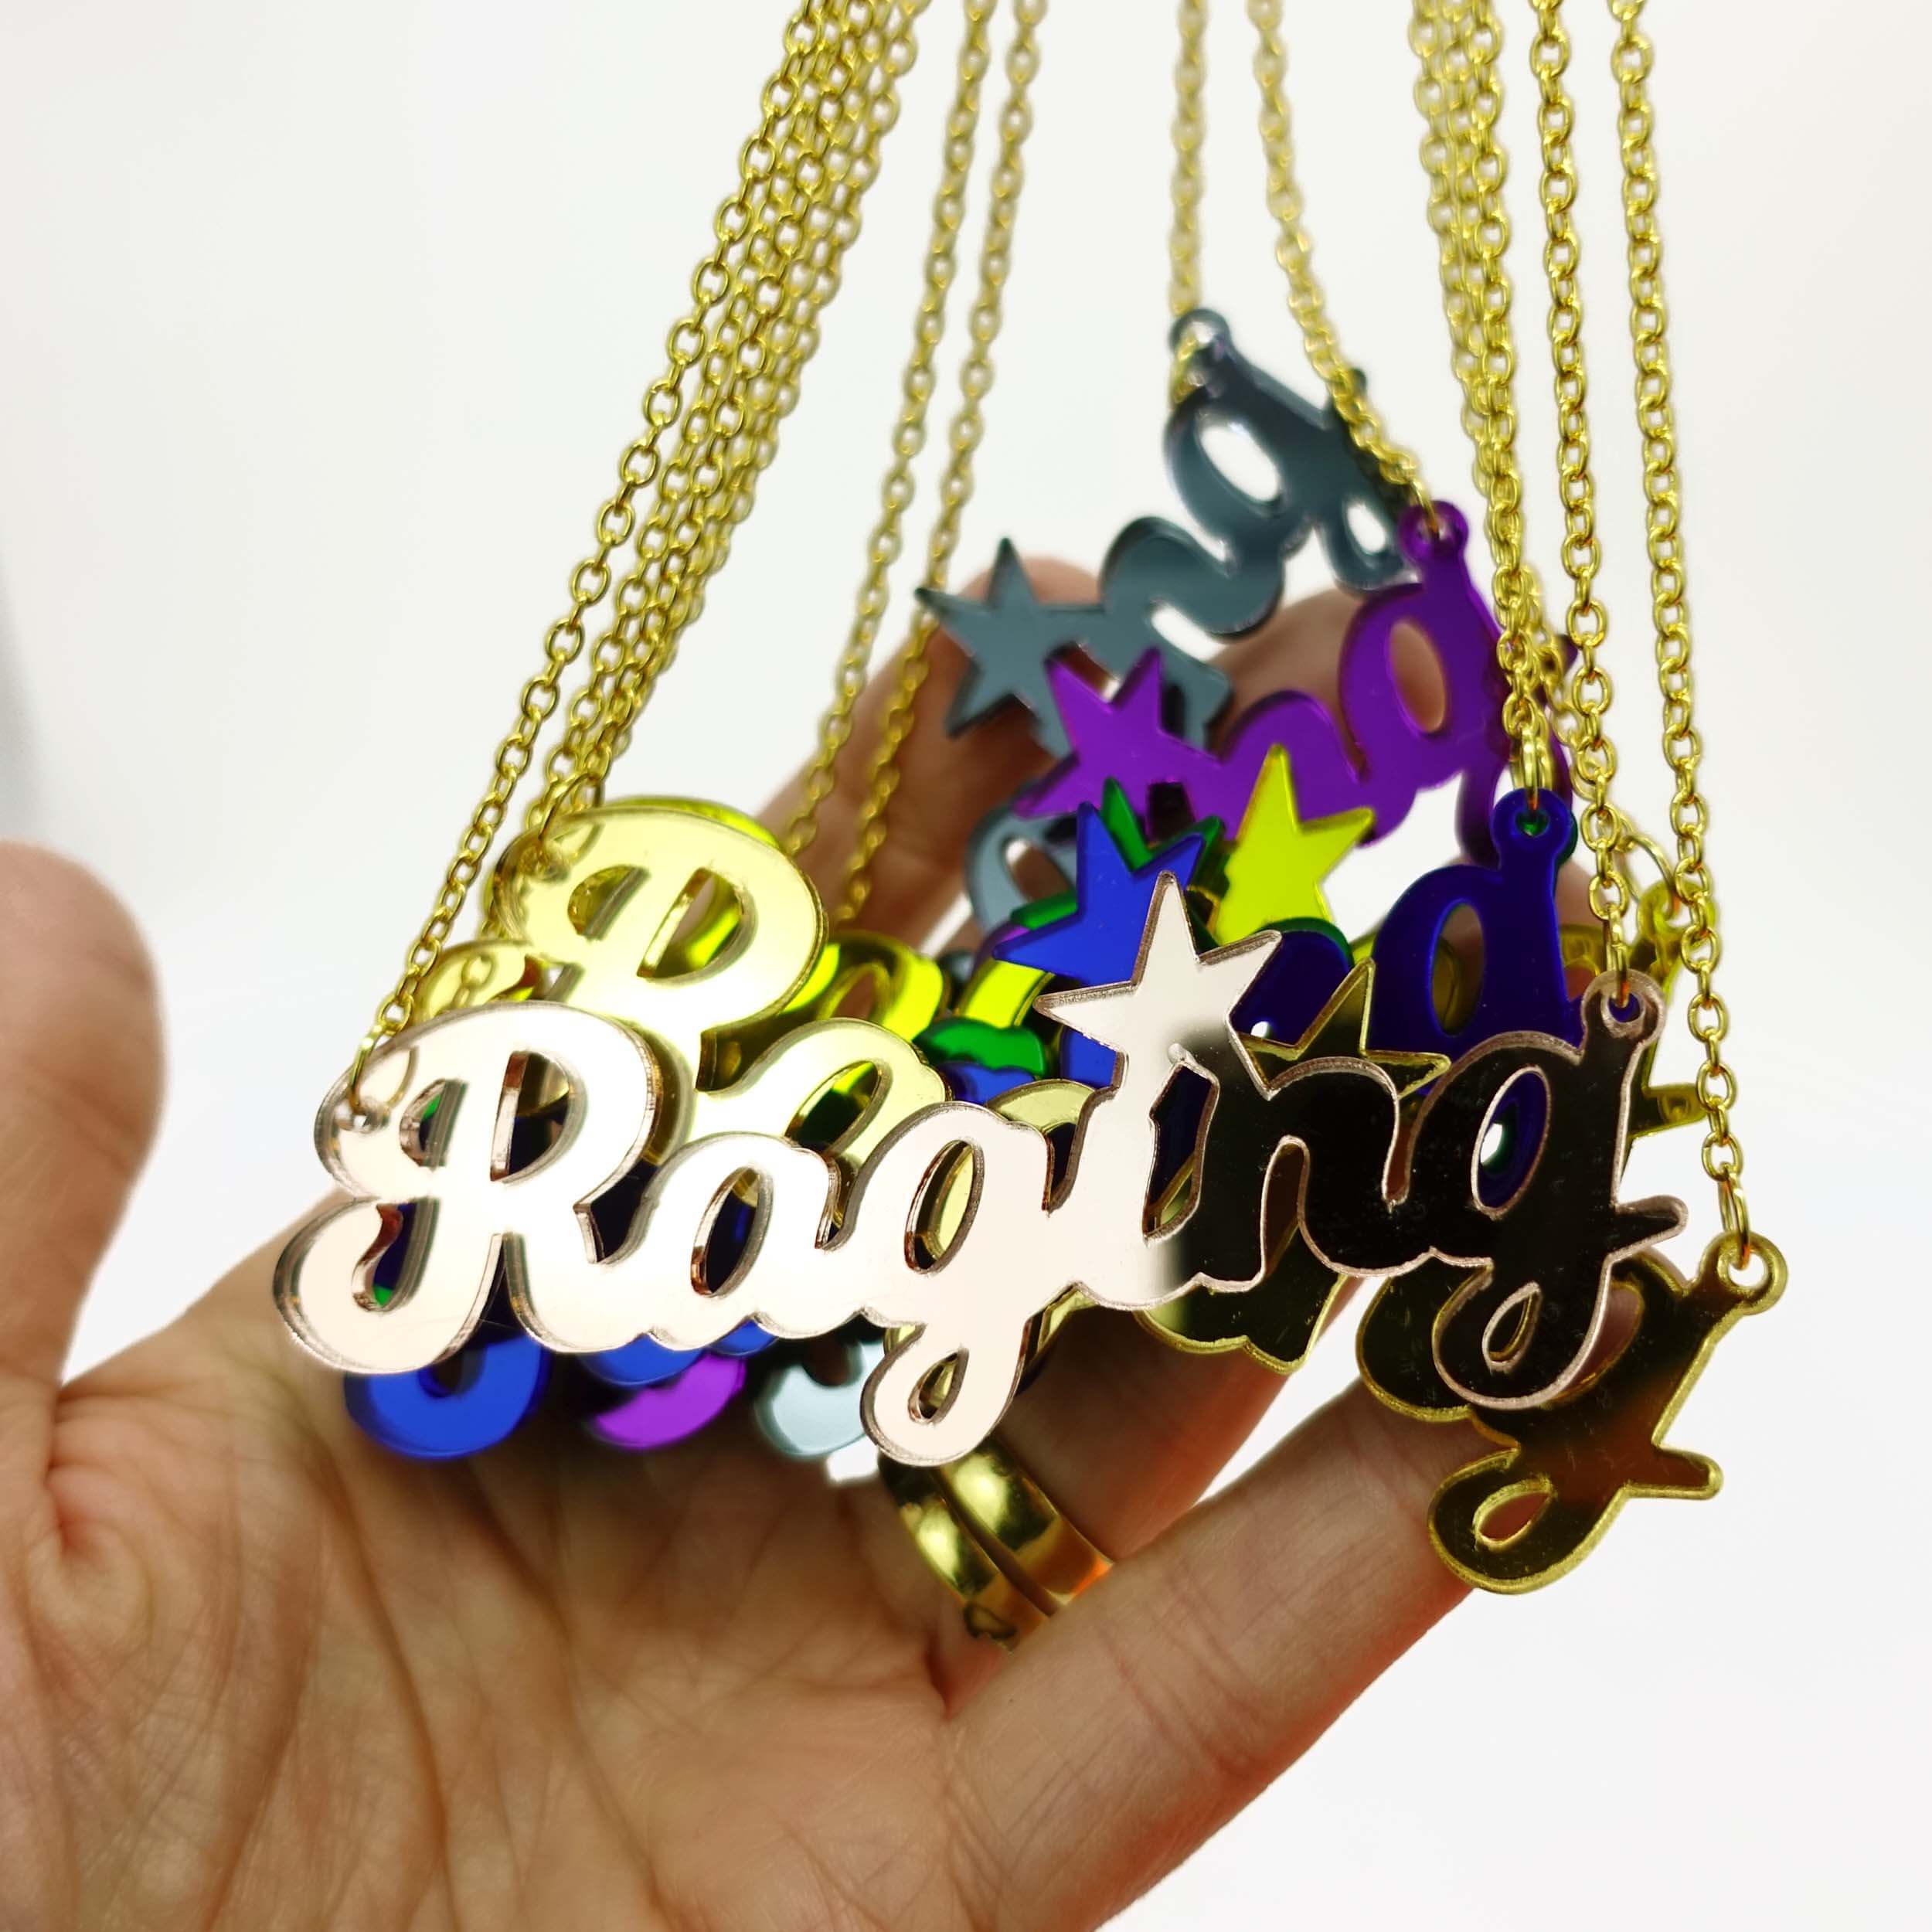 Group shot of new mirror Raging necklaces shown hanging with a hand behind for size, designed by Sarah Day the founder of Wear and Resist, raising money for women's charities. 